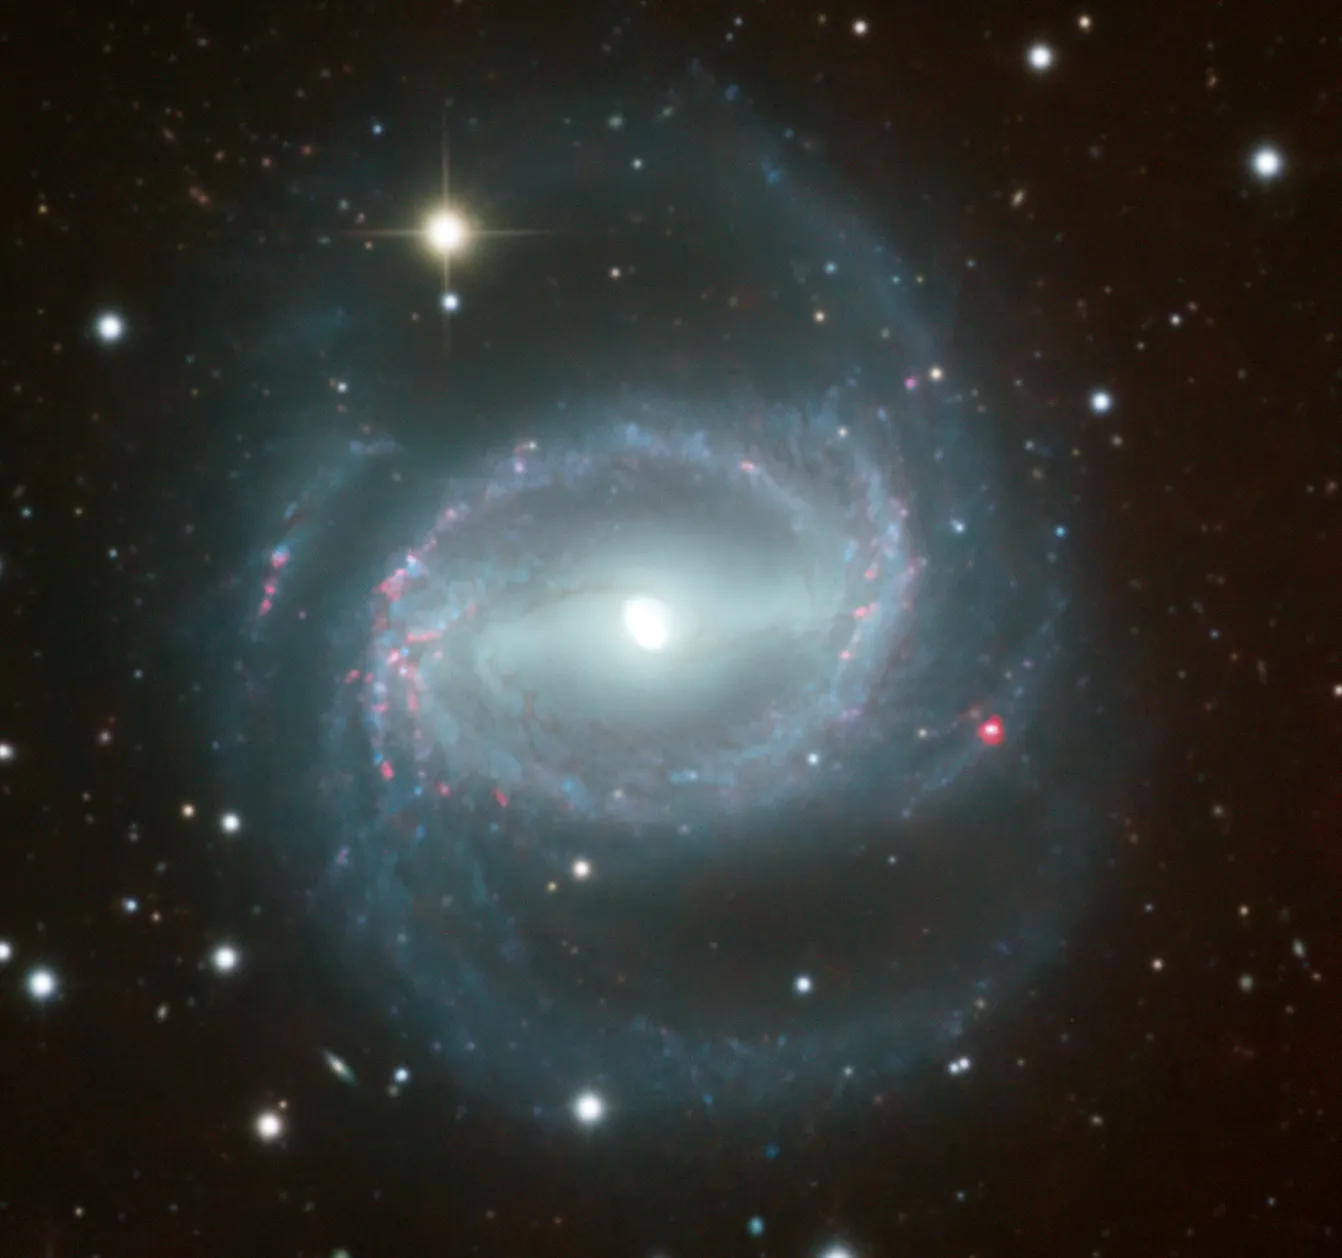 Hydrogen Alpha regions photographed in NGC 1433 galaxy at Ozark Hills Observatory